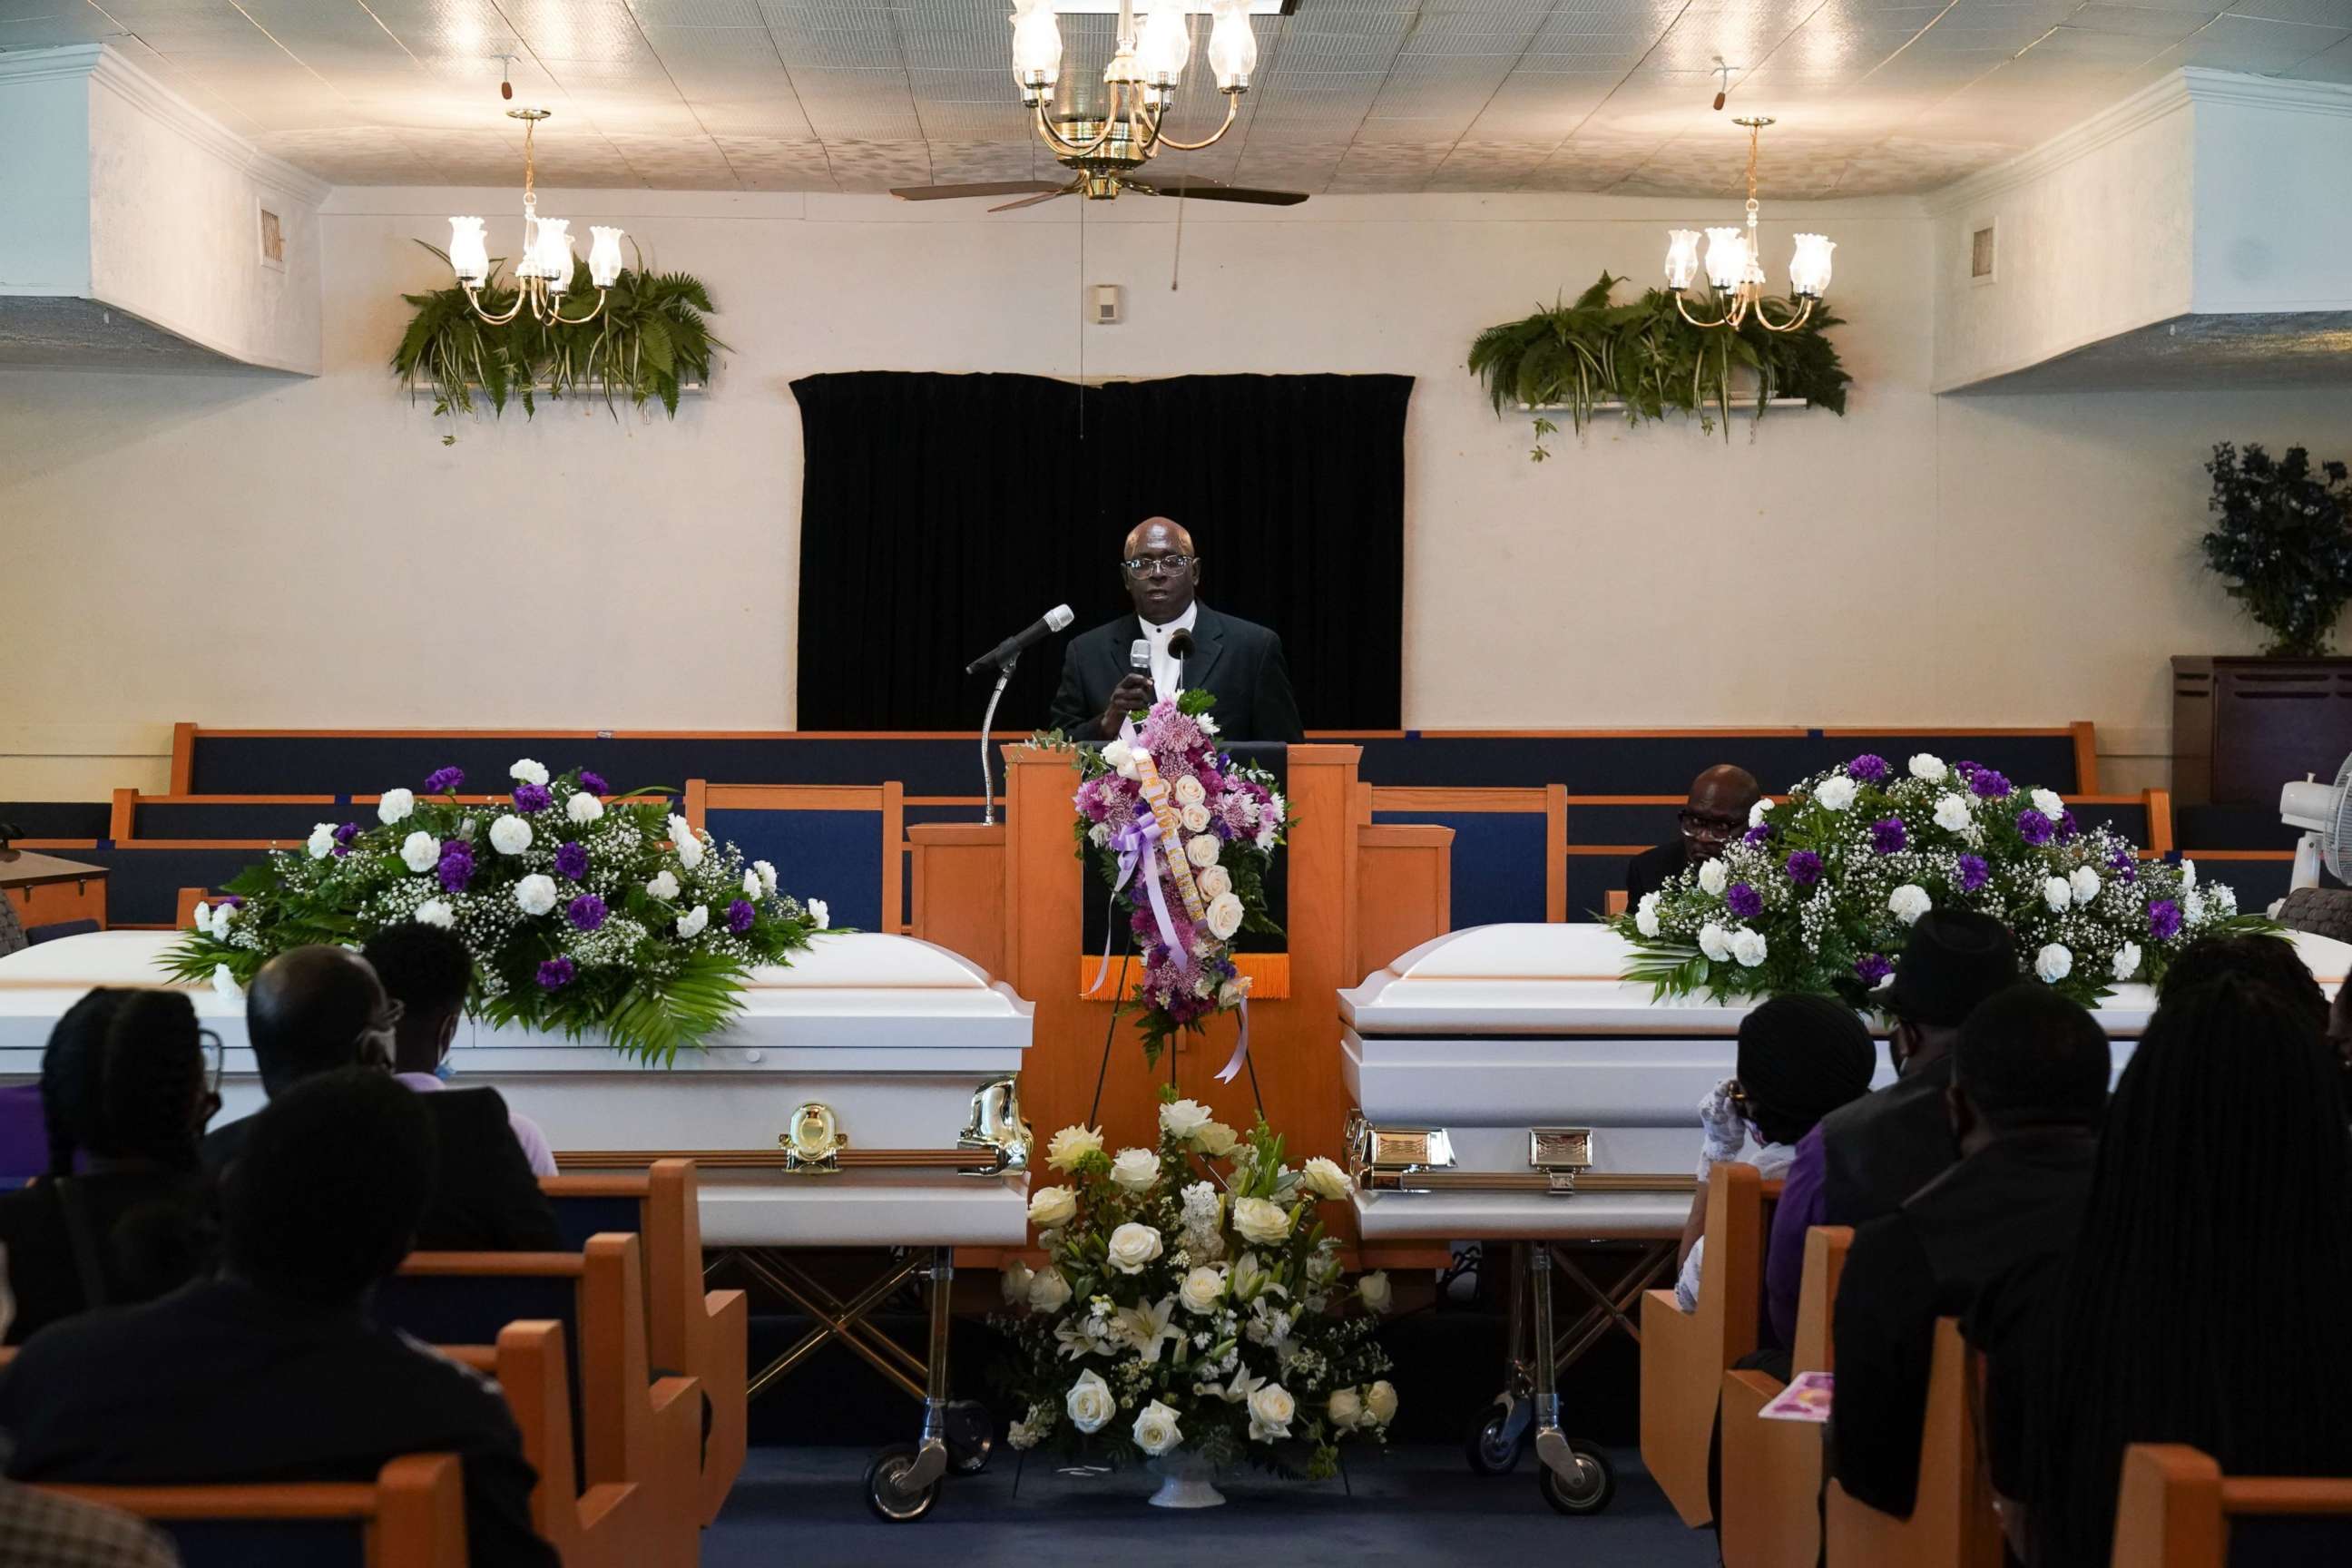 PHOTO: A Reverend speaks at a double funeral service for a mother and daughter who both died of coronavirus, at the Denley Drive Missionary Baptist church in Dallas, July 30, 2020.